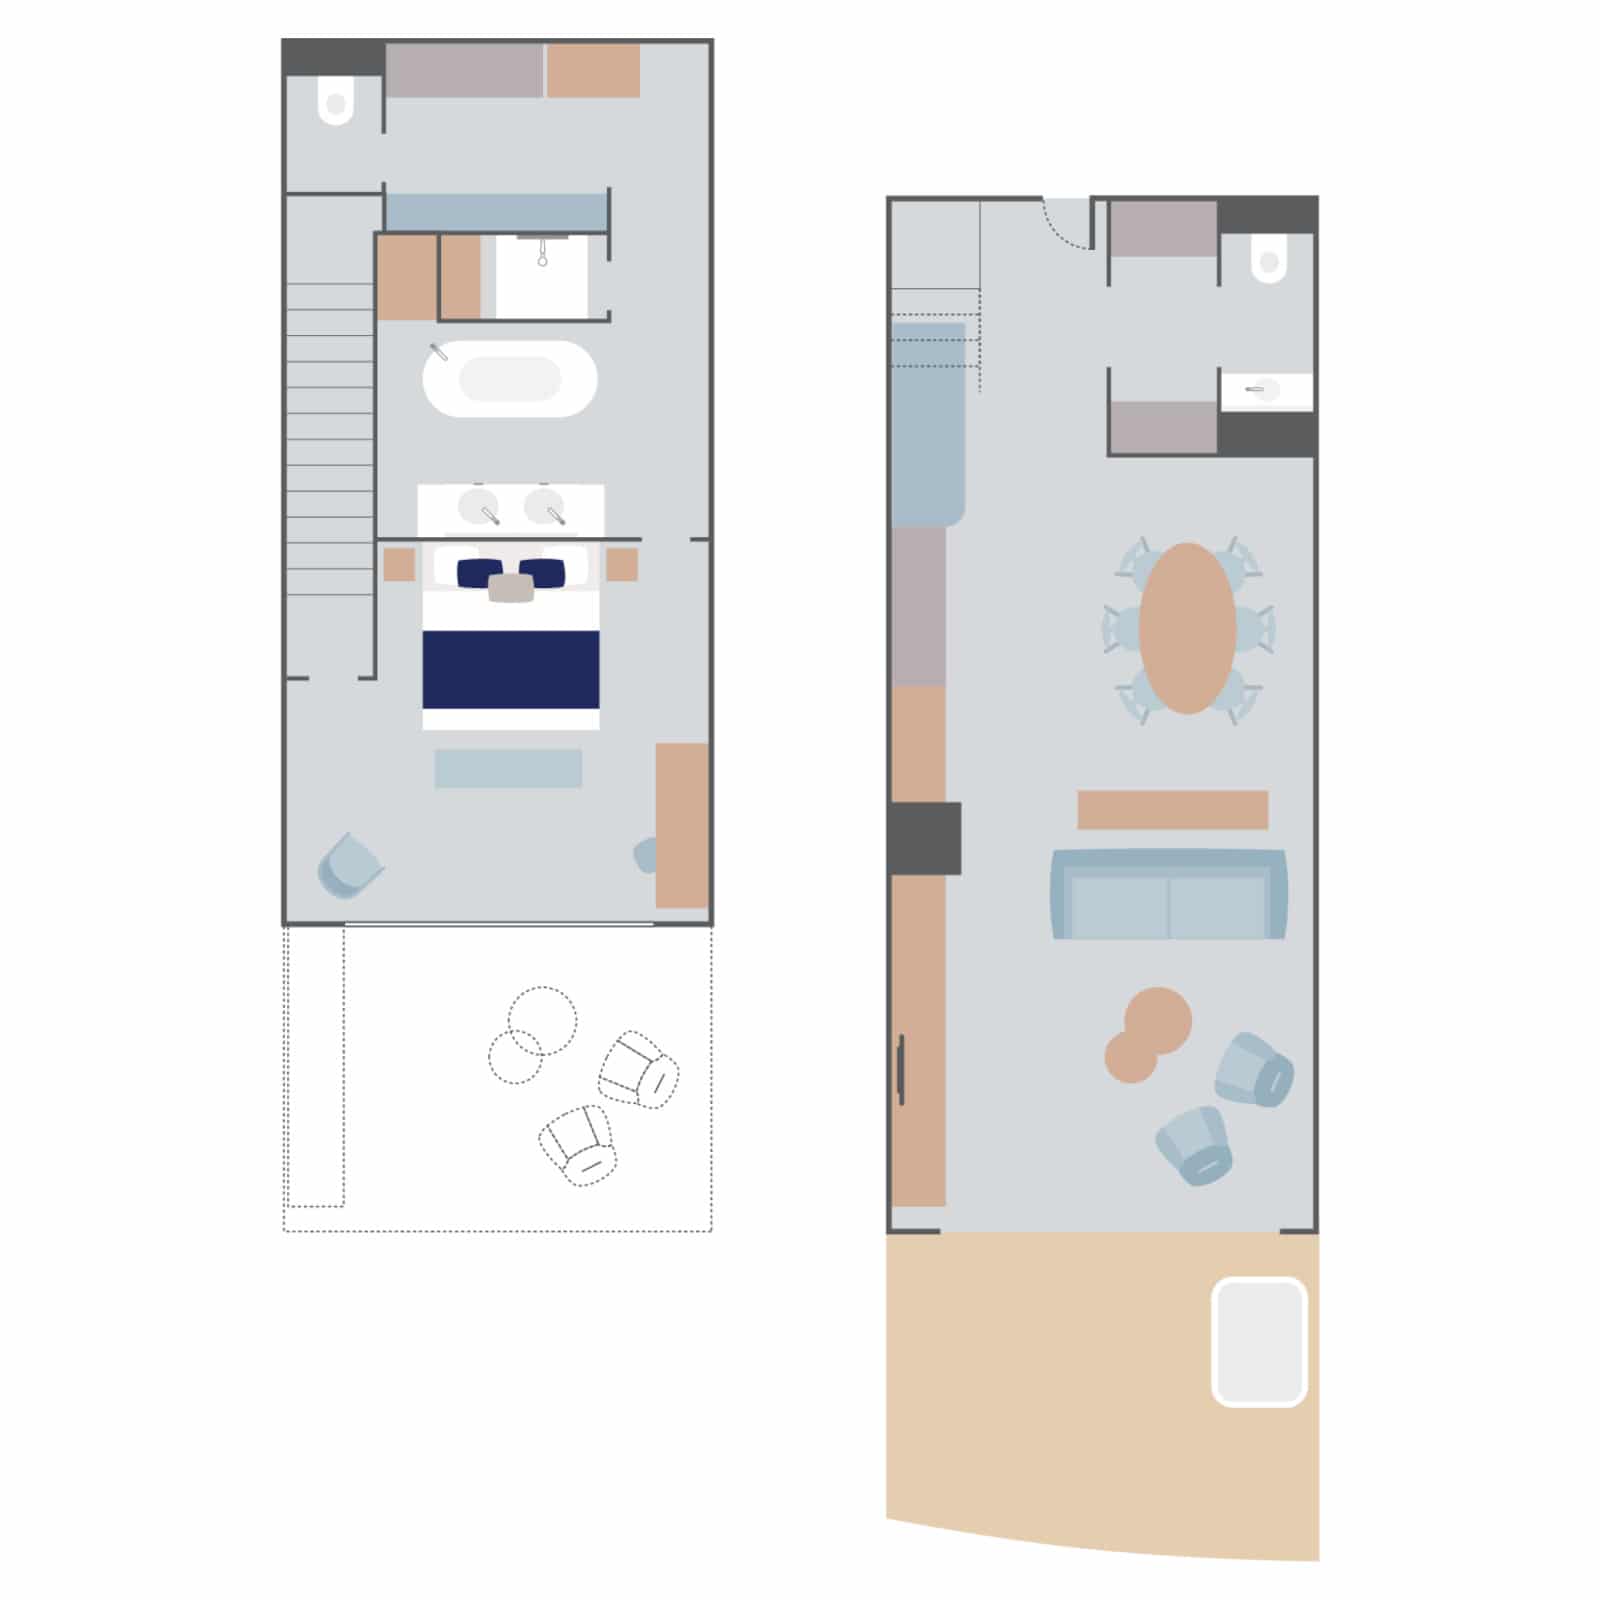 Layout of Duplex Suite aboard Le Commandant Charcot hybrid electric ship with two floors connected by stairs, double bed, couches & 2 separate seating areas, 2 bathrooms (1 with tub), walk-in closet, kitchen table & chairs & large doorway to a balcony with a hot tub.